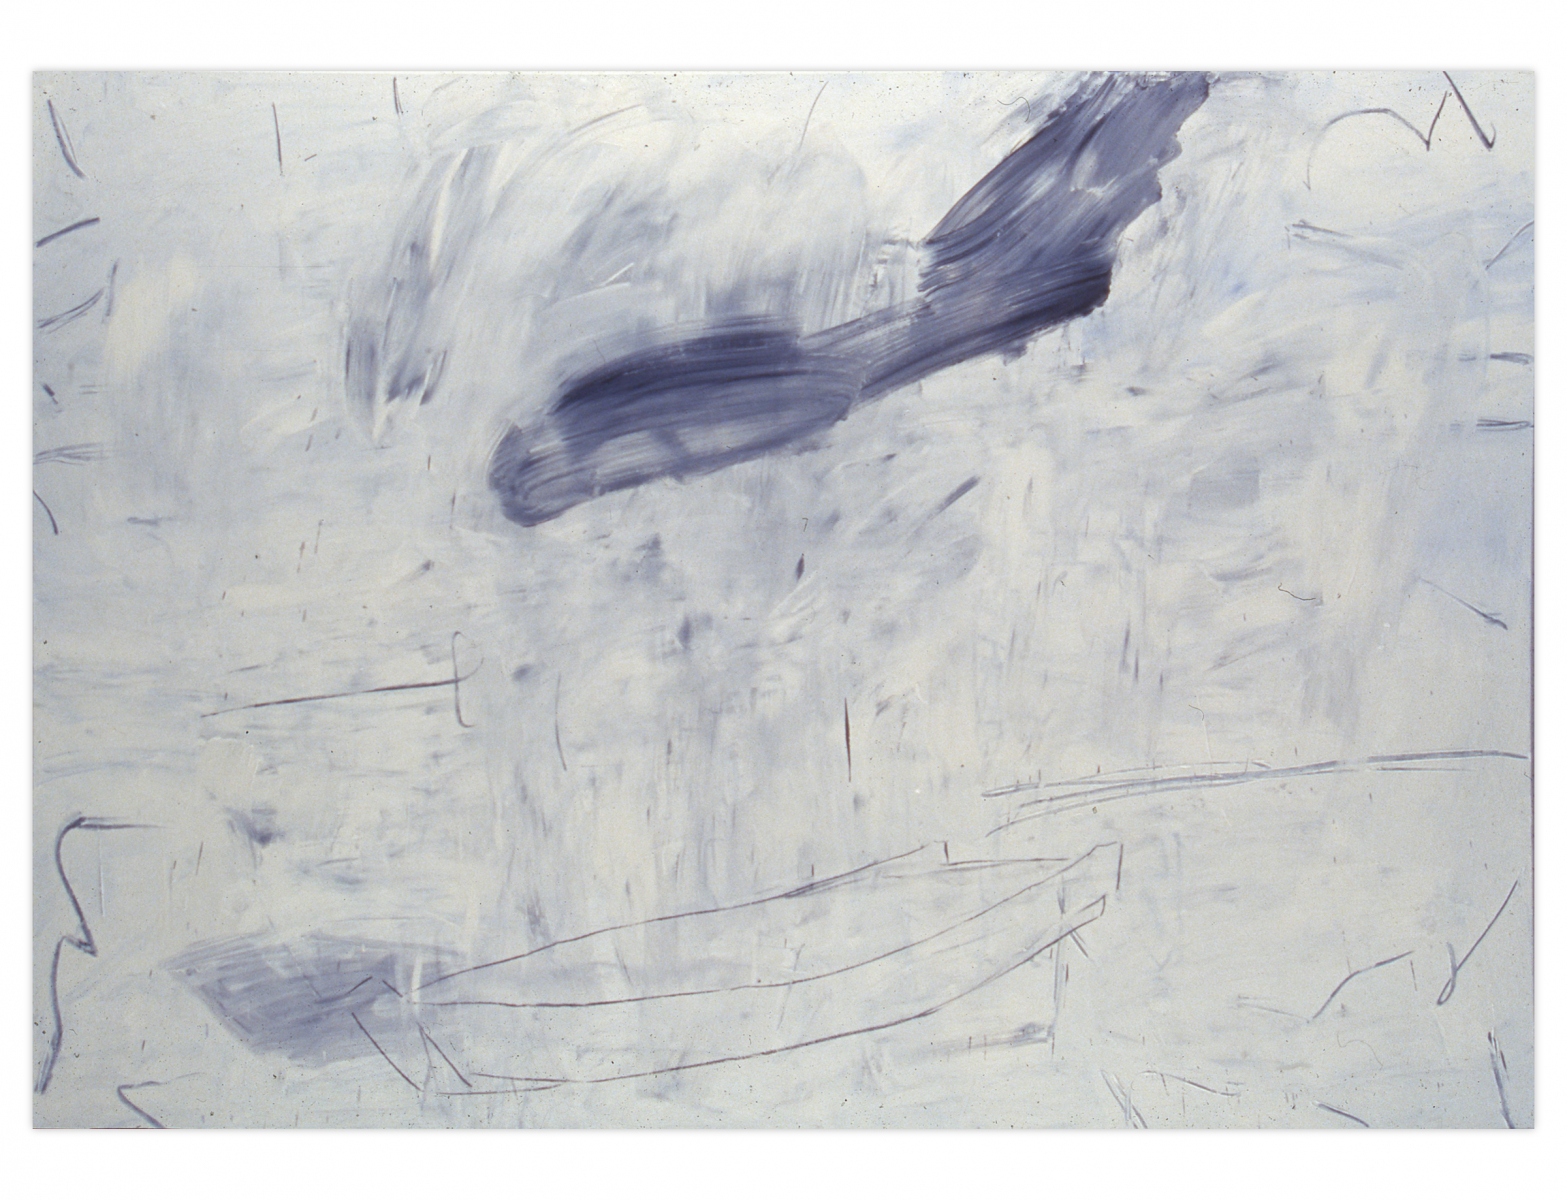 Untitled-92014, 1992, Oil on Canvas, 76x102cm